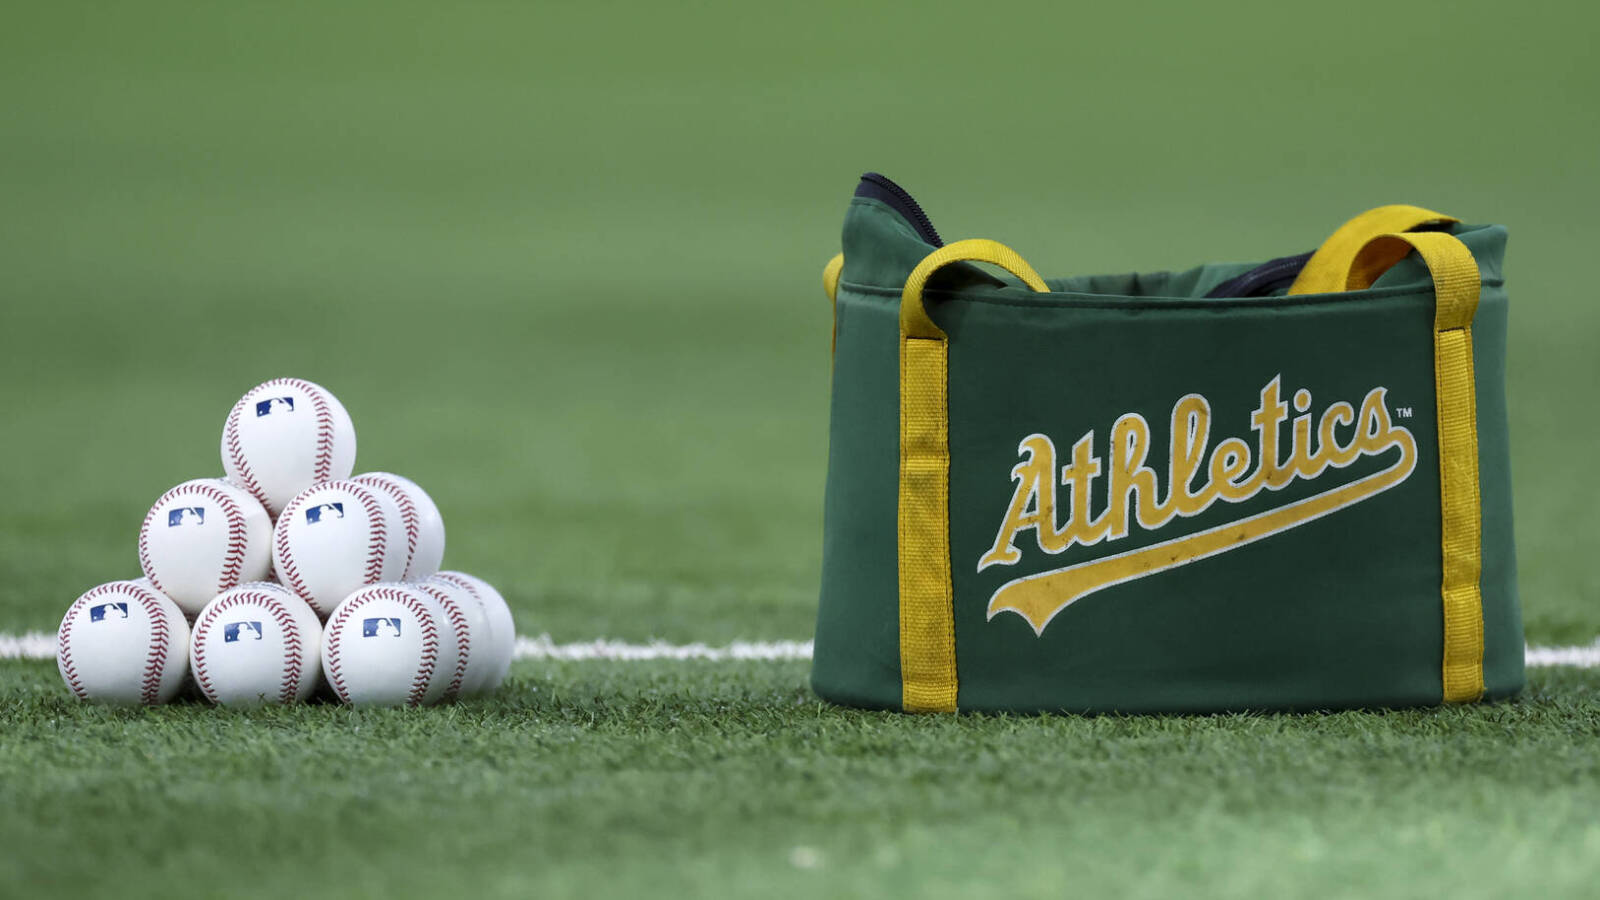 Athletics' relocation plan takes huge steps forward with latest developments